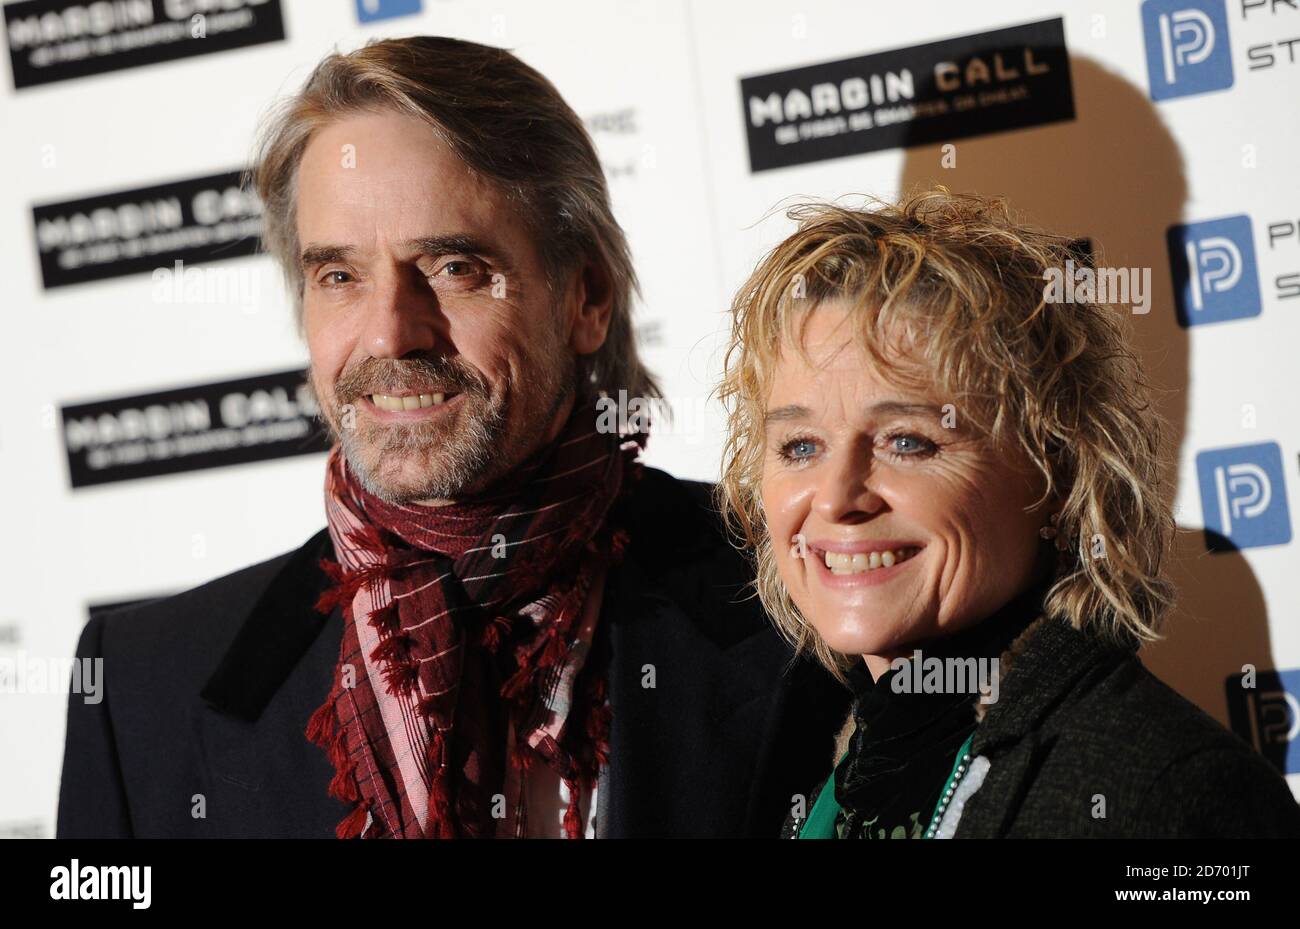 Jeremy Irons and Sinead Cusack arrive at the premiere of Margin Call at the Vue cinema in London Stock Photo